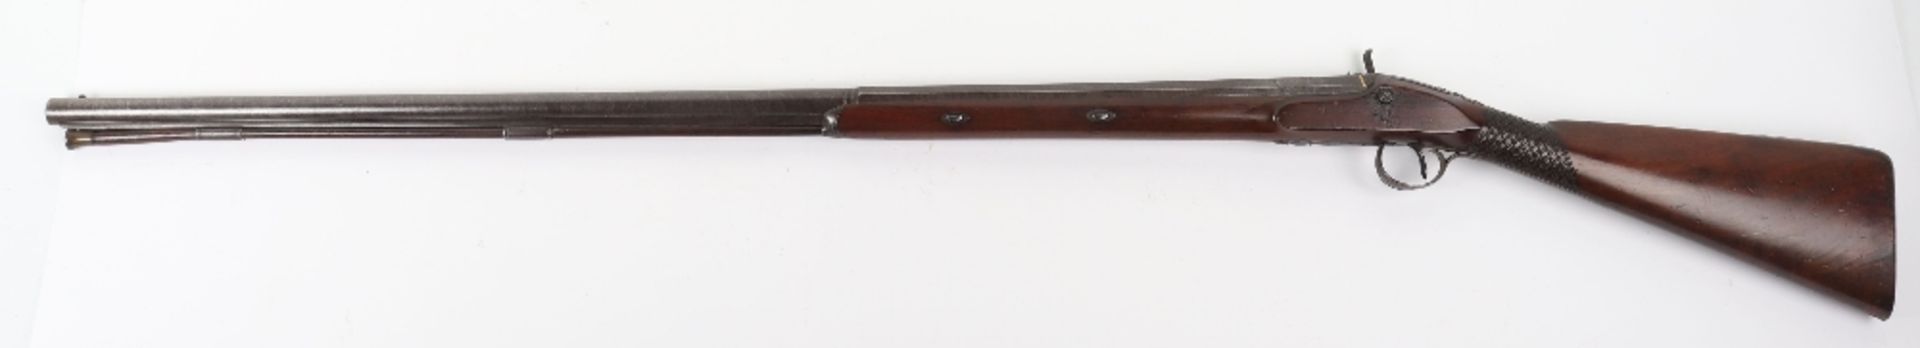 16-Bore Percussion Sporting Gun by D. Egg, Late 18th Century - Image 15 of 15